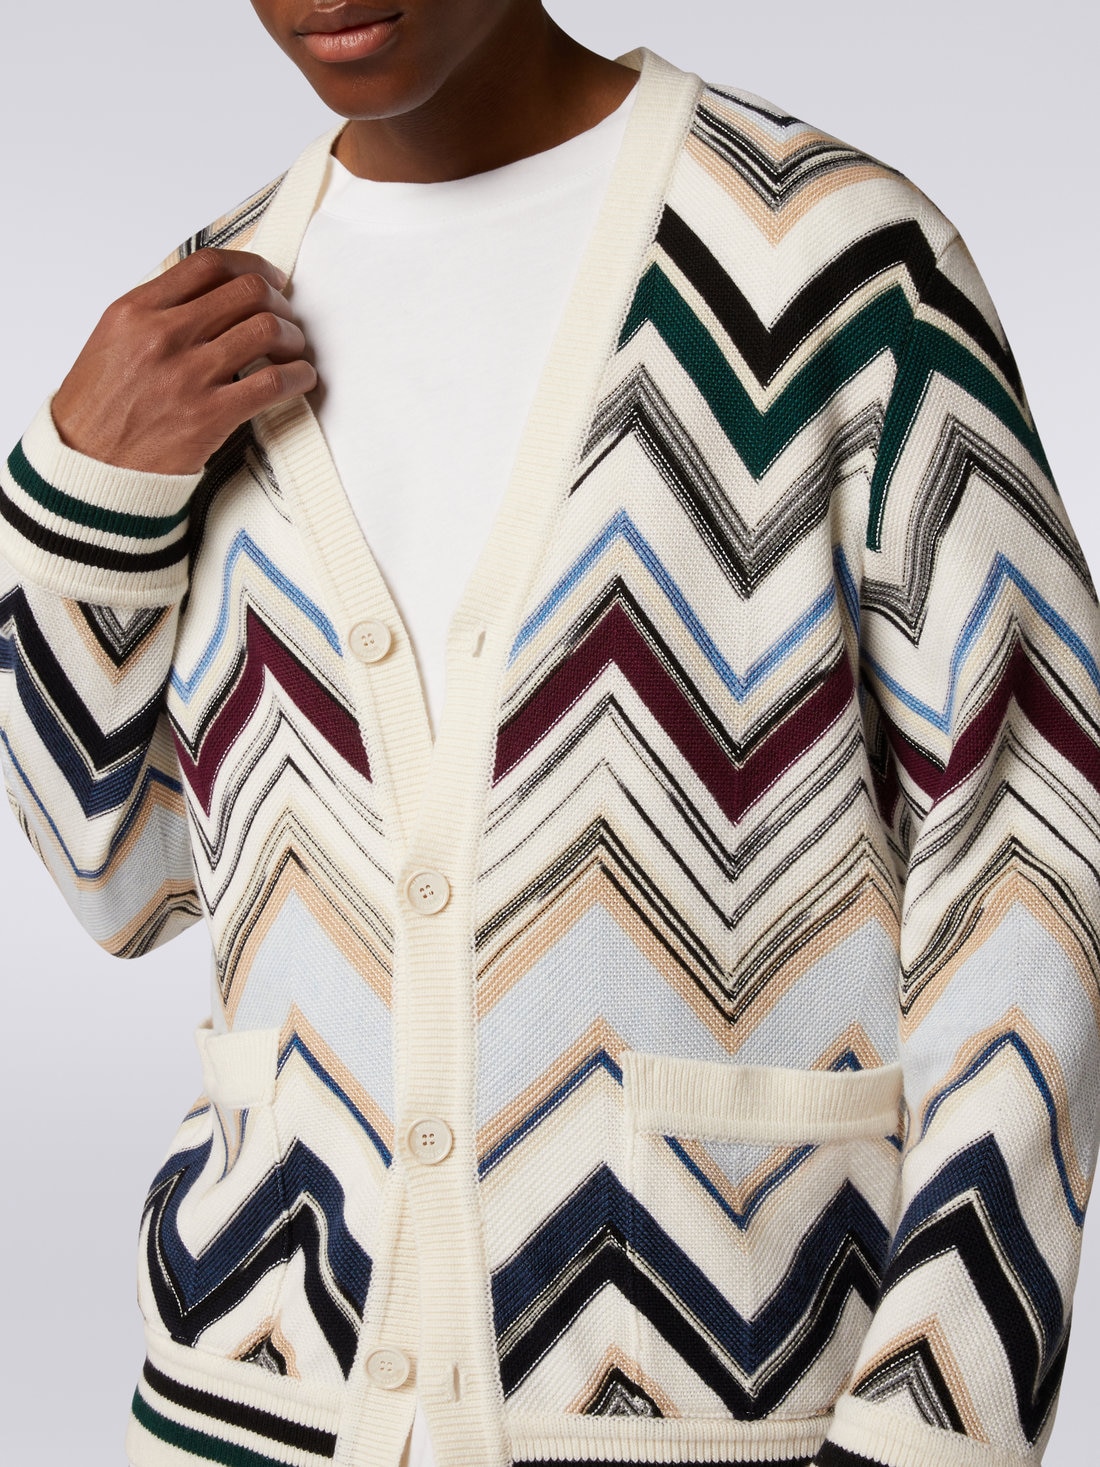 Zigzag wool and cotton knit cardigan, Multicoloured  - 4